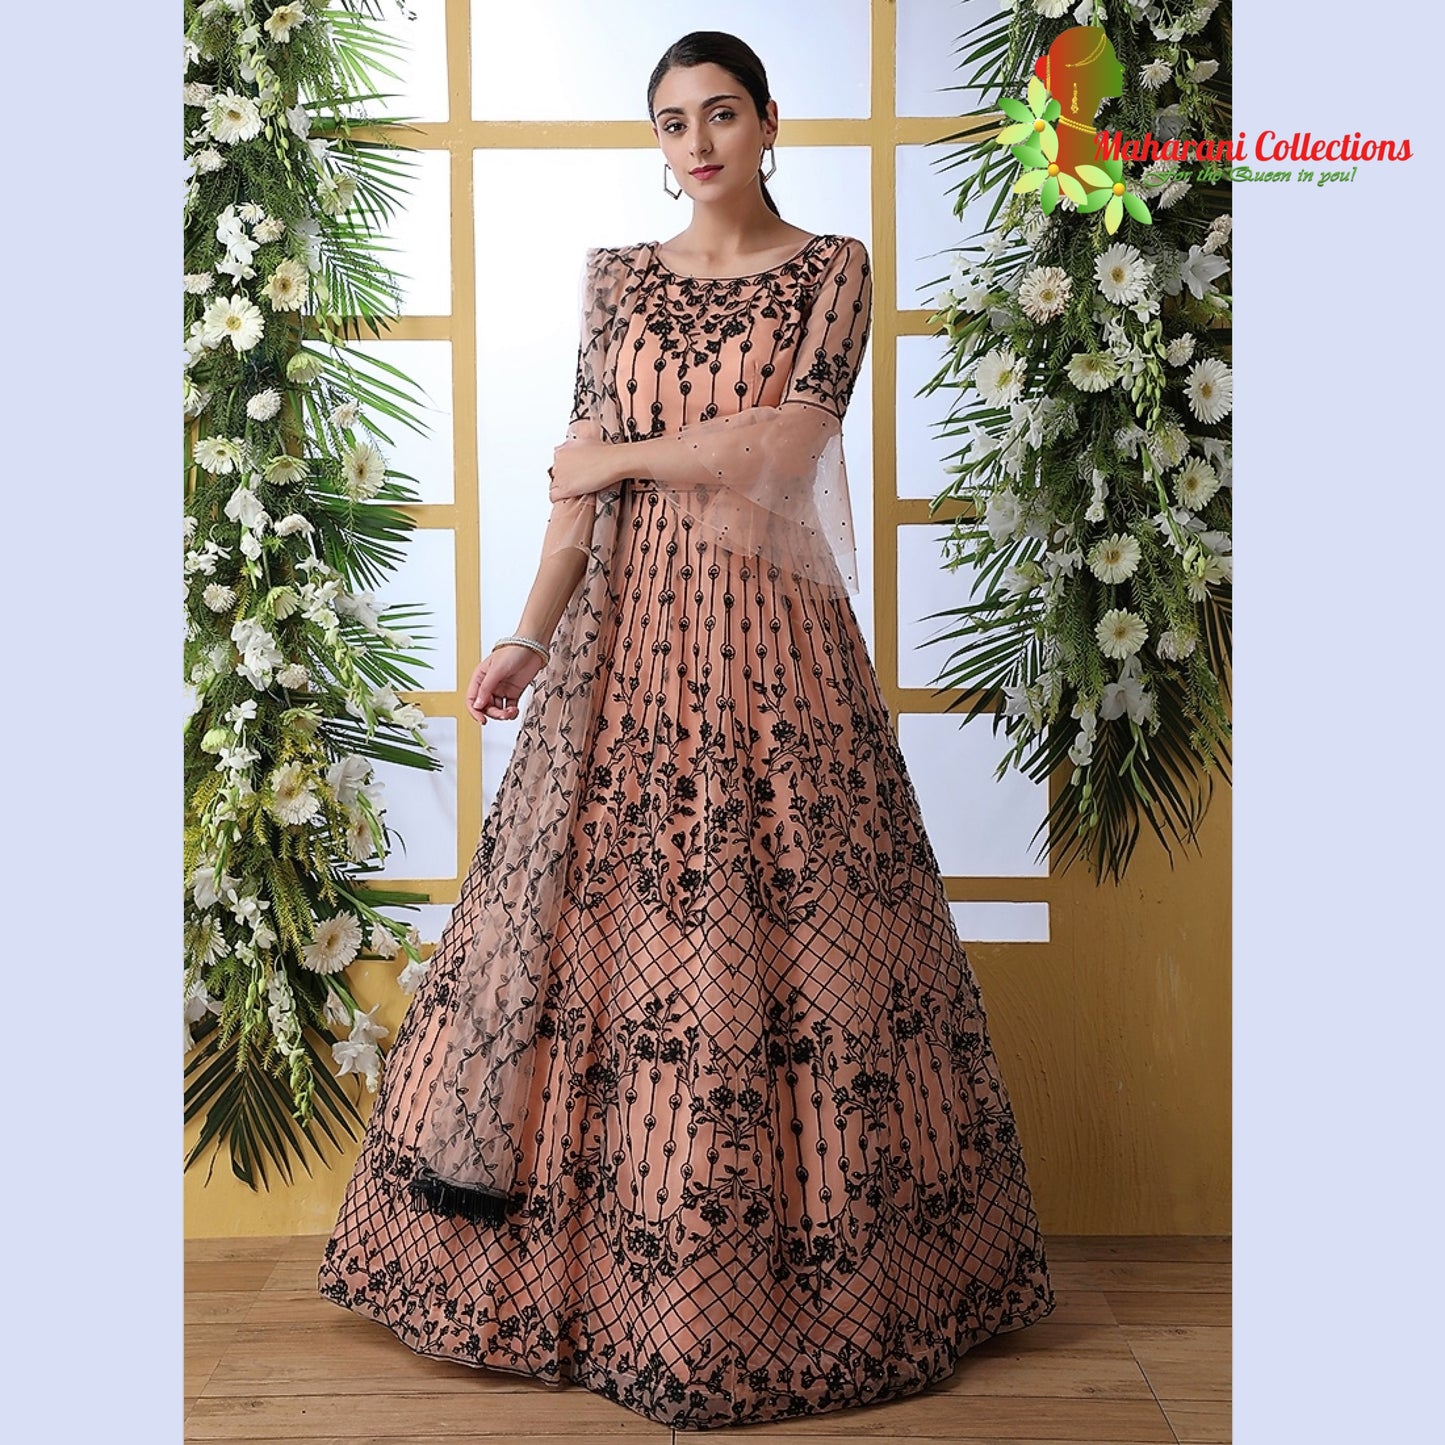 Maharani's Designer Gala Gown - Peach and Black with Exquisite Thread Work